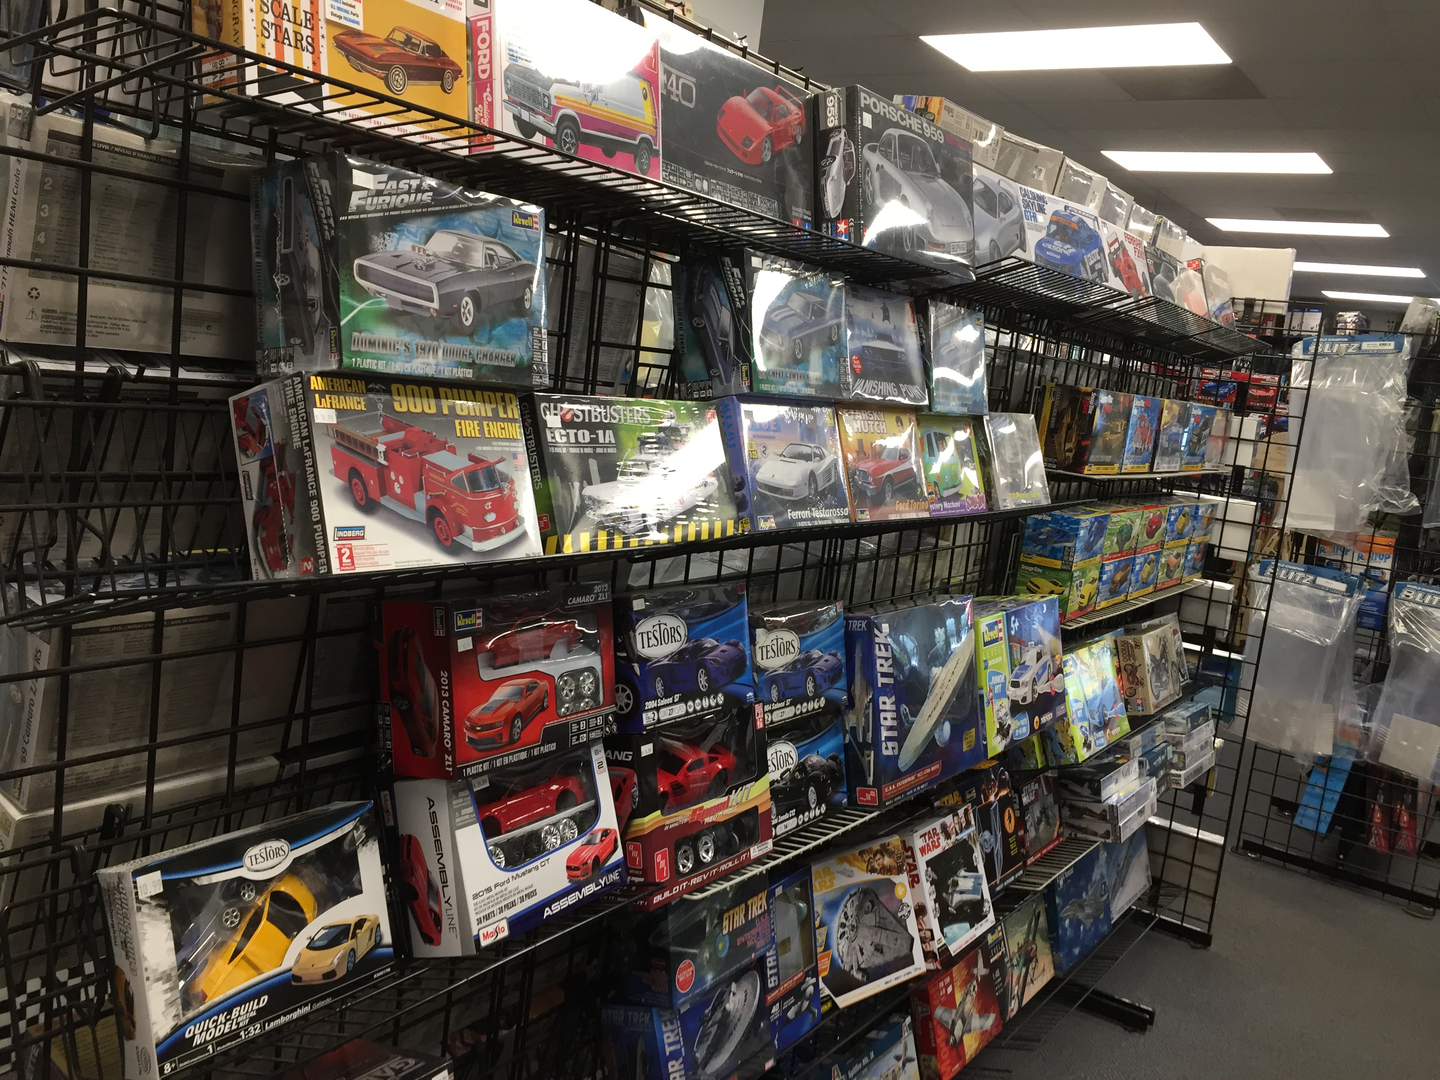 Rc Cars And Trucks, Plastic Models - R/c Hobby Nook - Smithfield, Nc